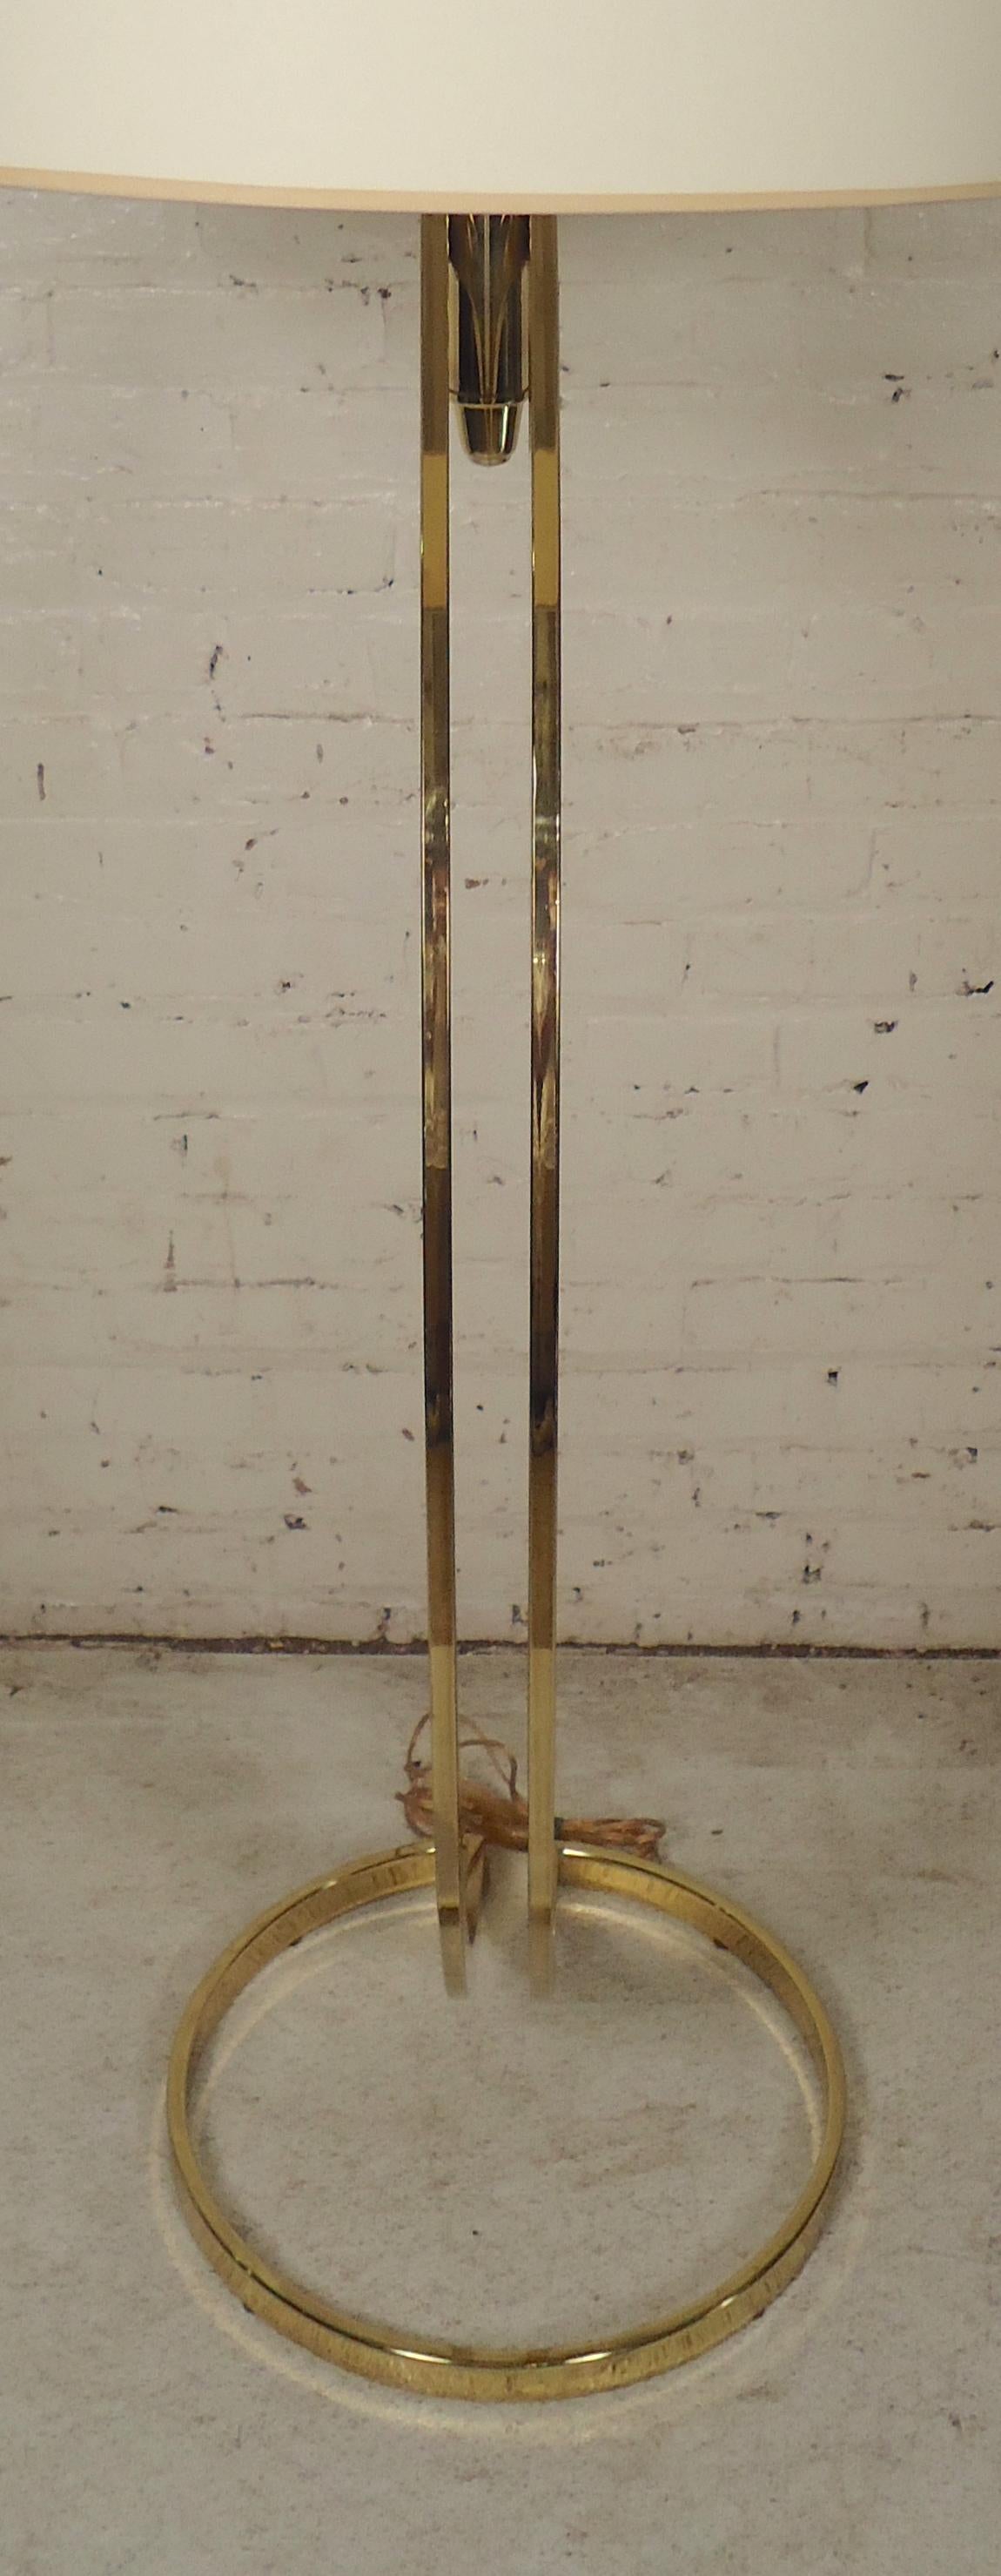 Vintage modern floor lamp with arching base and large shade. Milo Baughman thick brass style design.
(Please confirm item location - NY or NJ - with dealer).
 